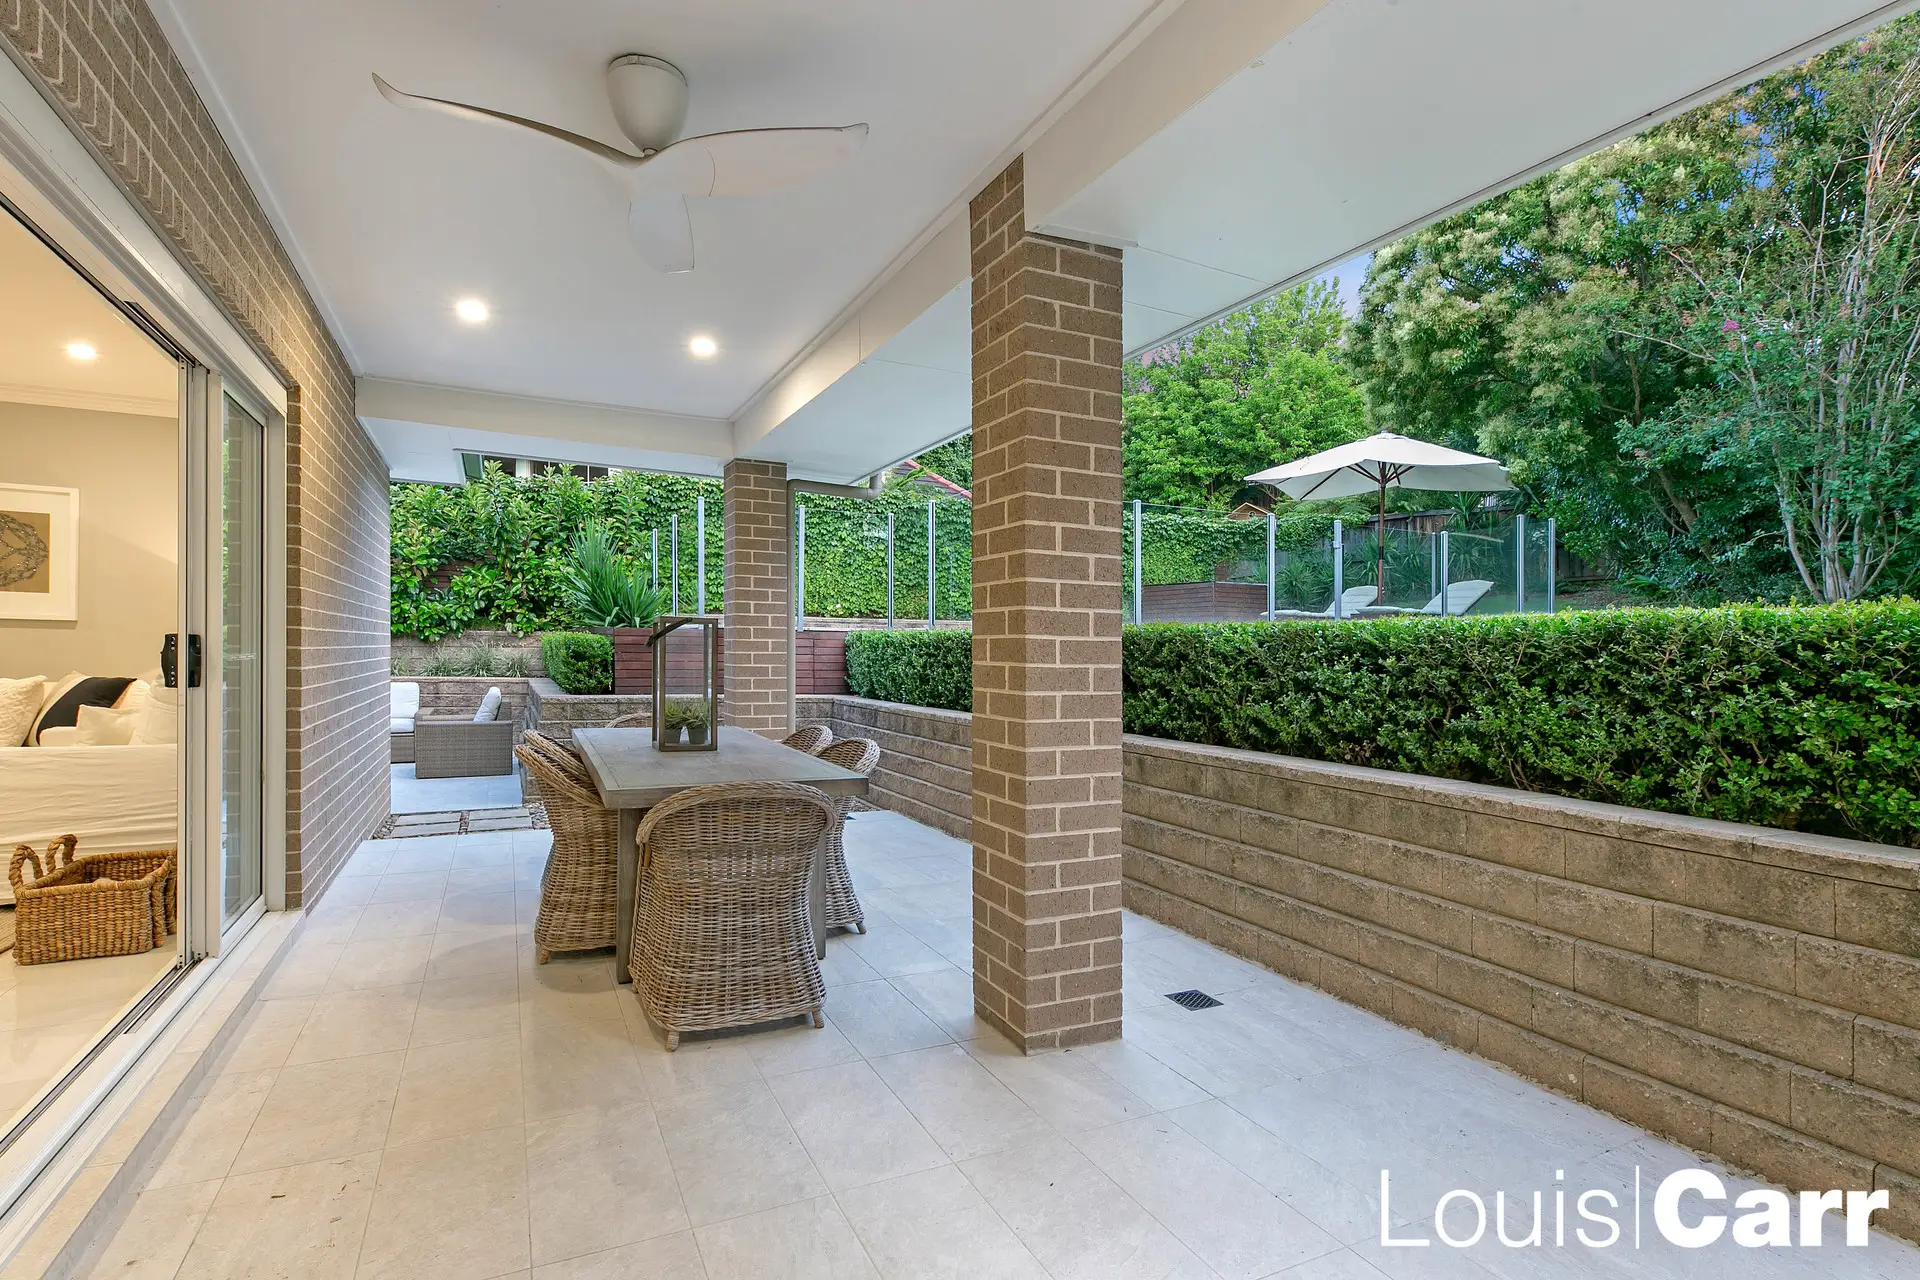 Photo #13: 1 Glenshee Place, Glenhaven - Sold by Louis Carr Real Estate